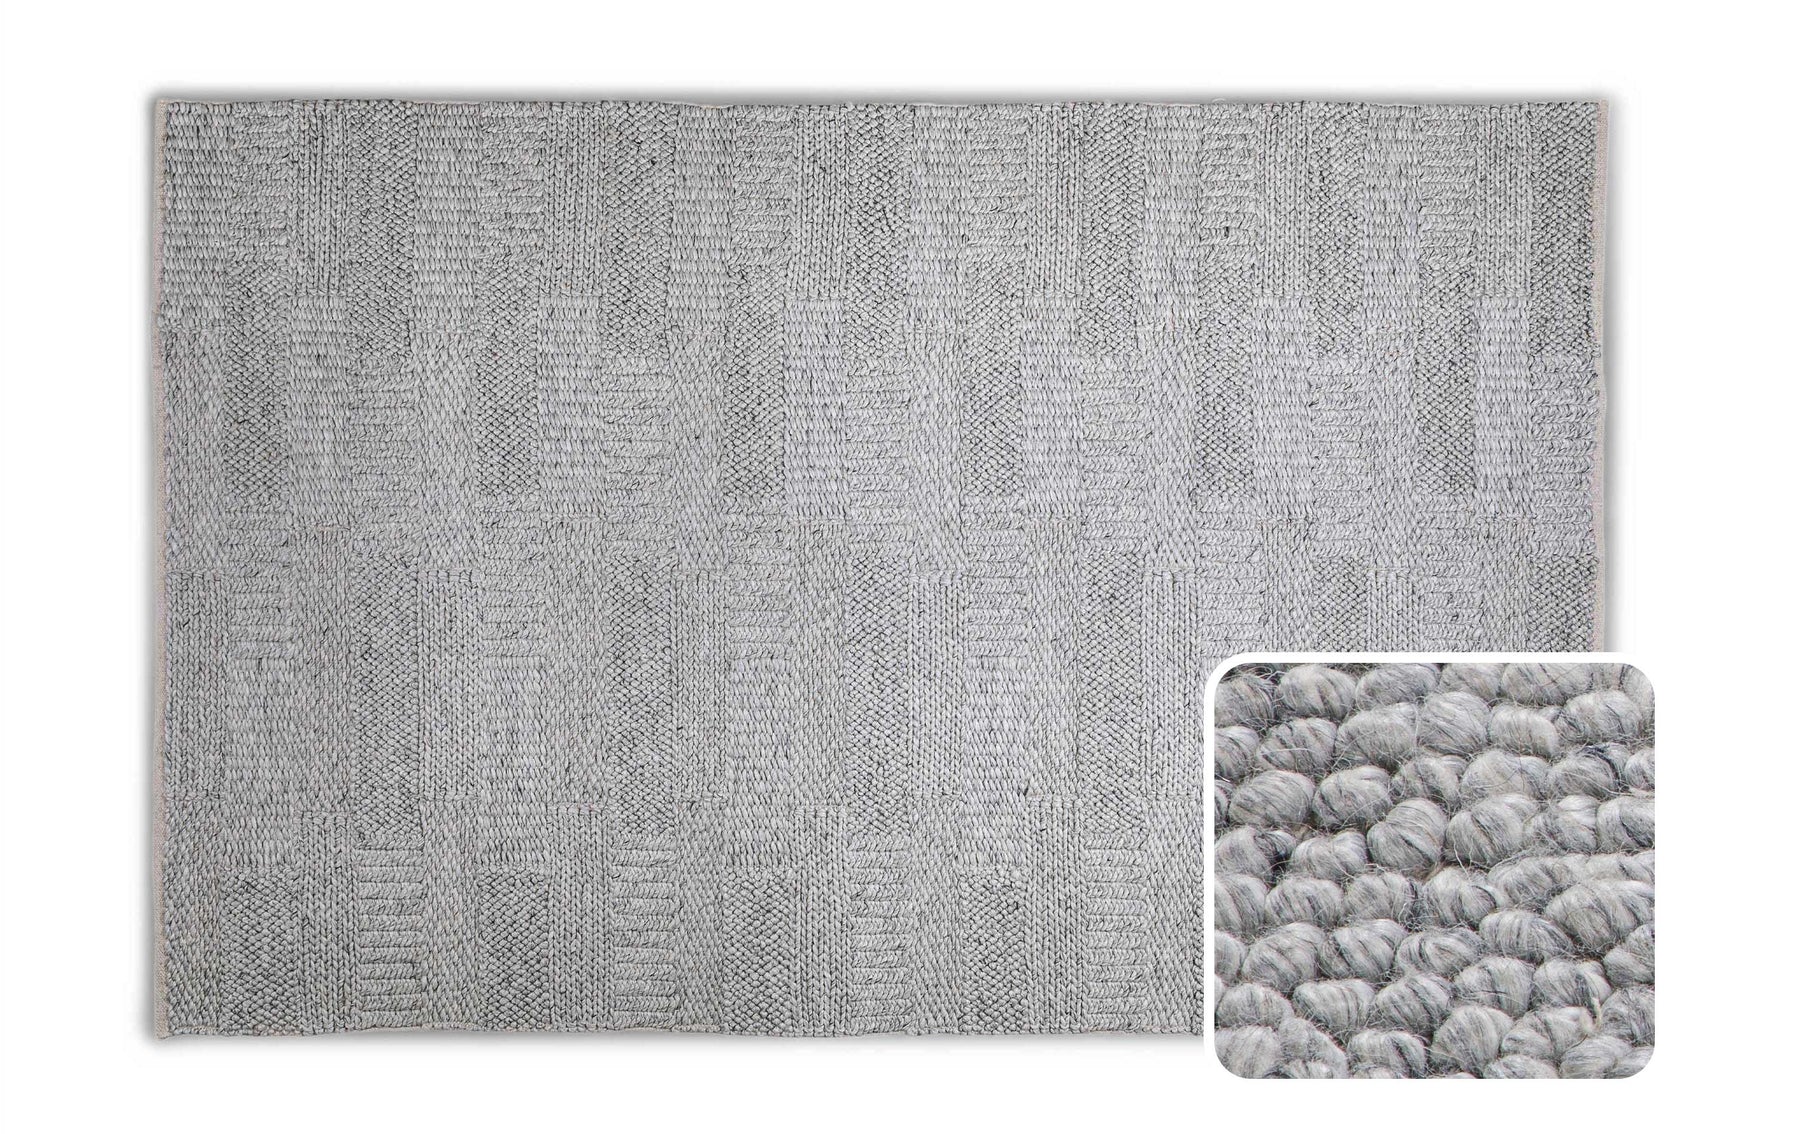 Stover 6 x 9 Area Rug